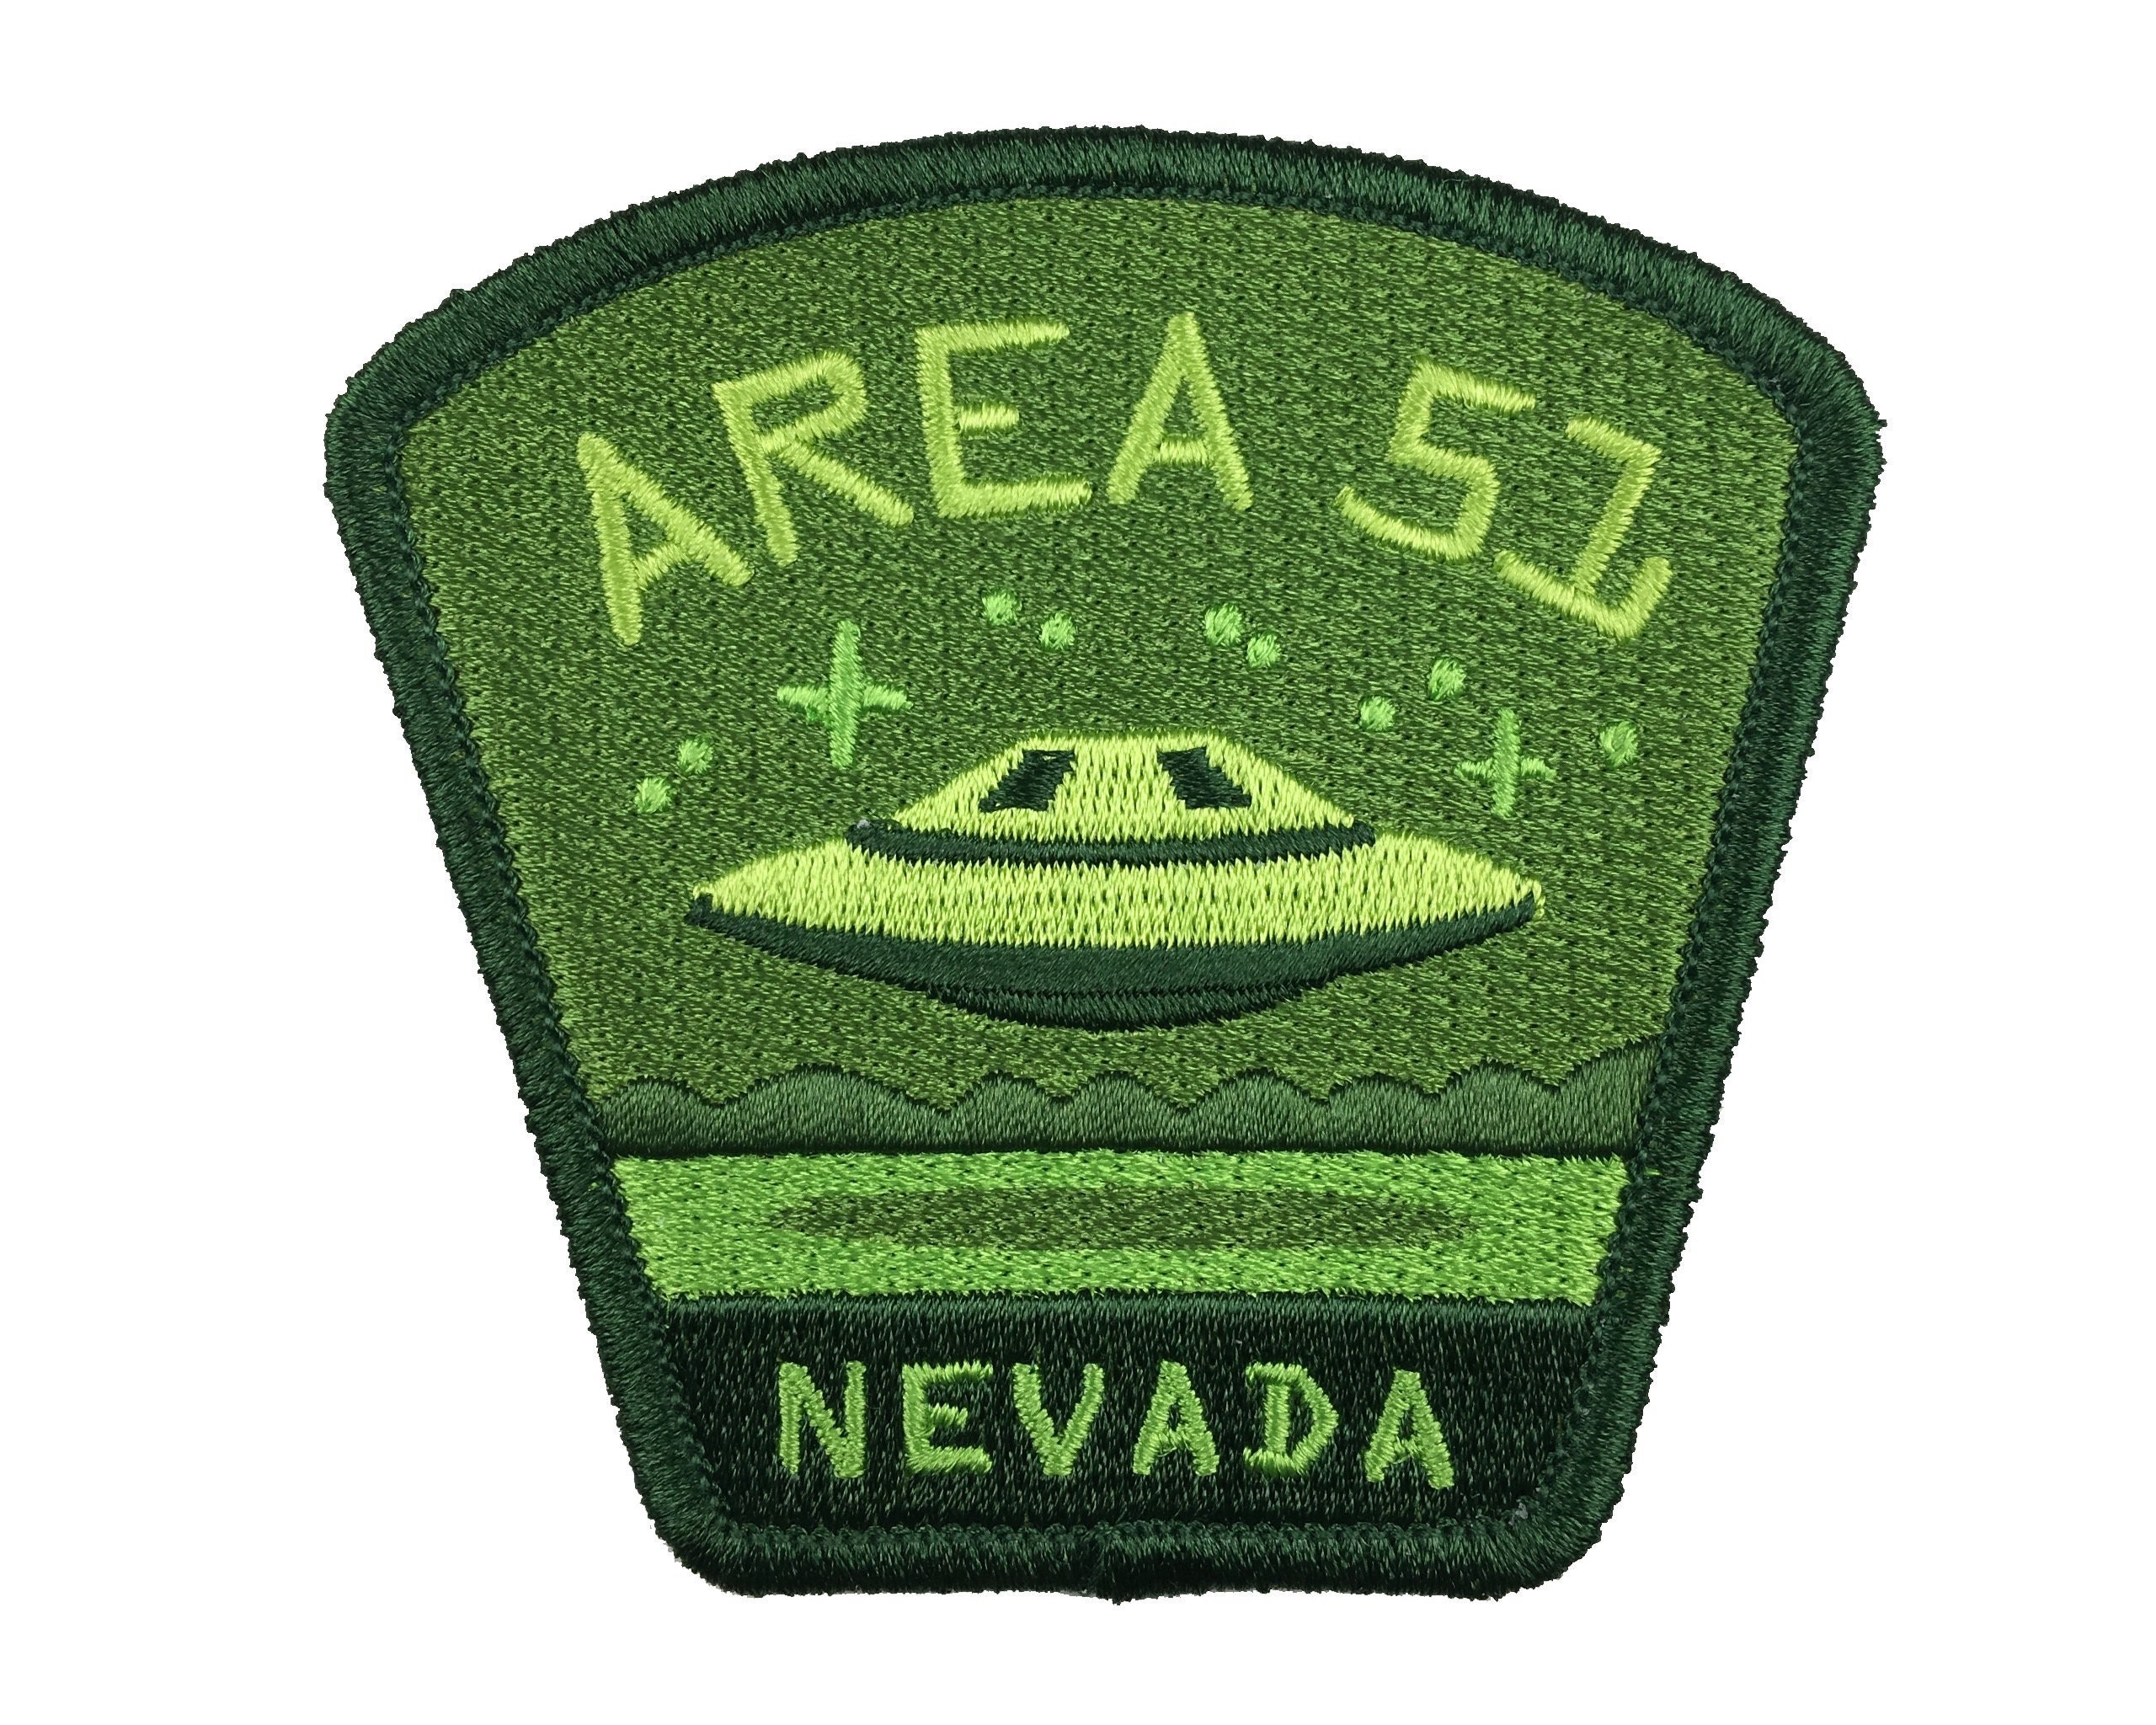 Travel Iron on Patch, Area 51 Patches, Travel Patches Iron on